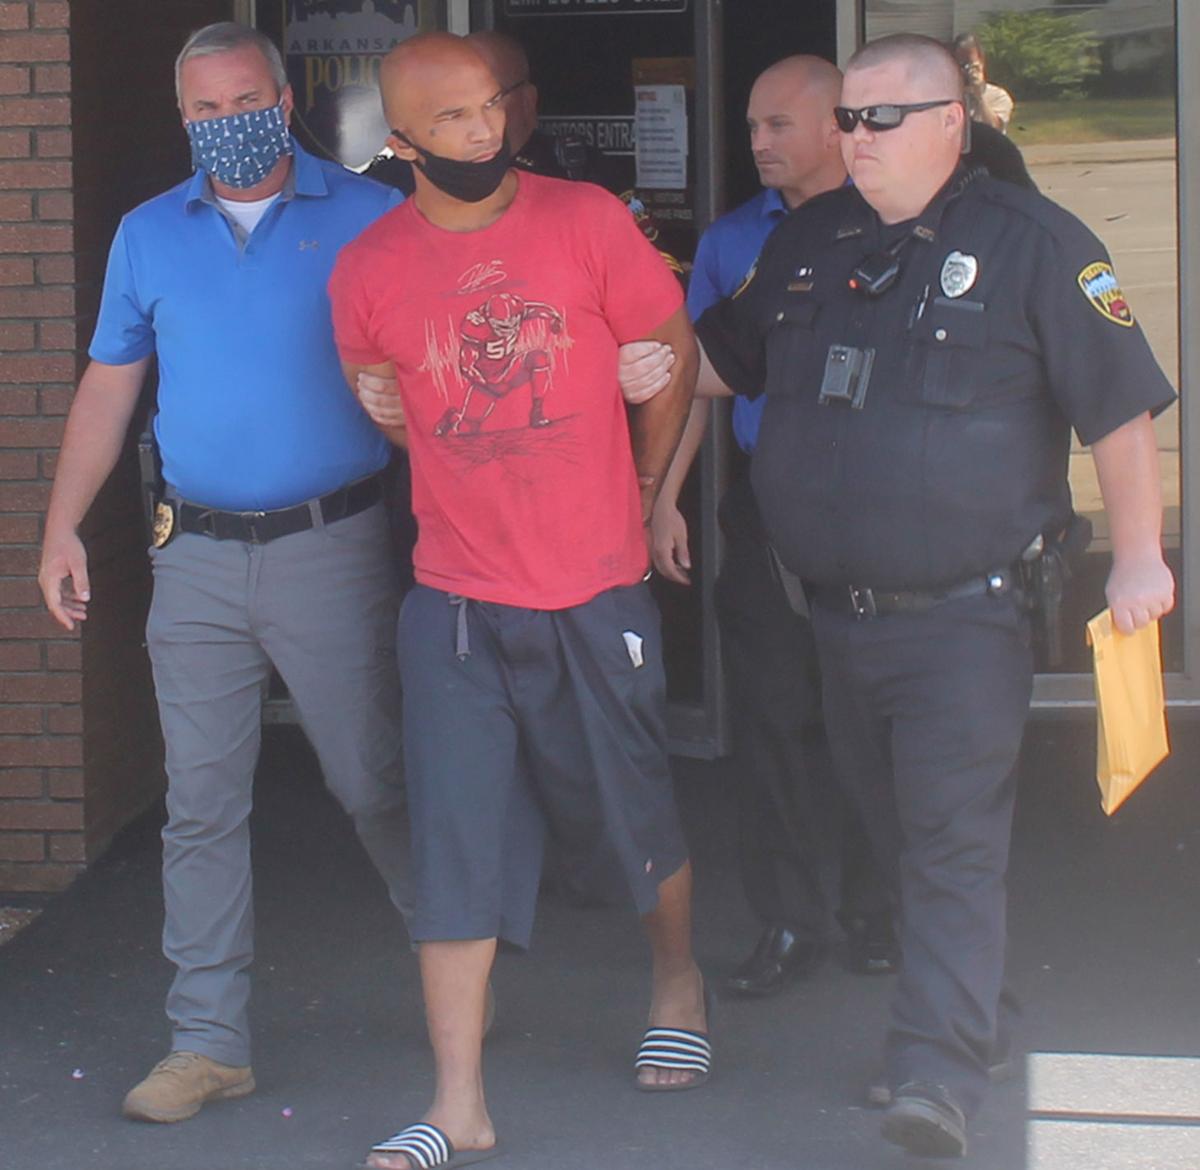 Searcy suspect's charge upped to capital murder in city's 3rd homicide